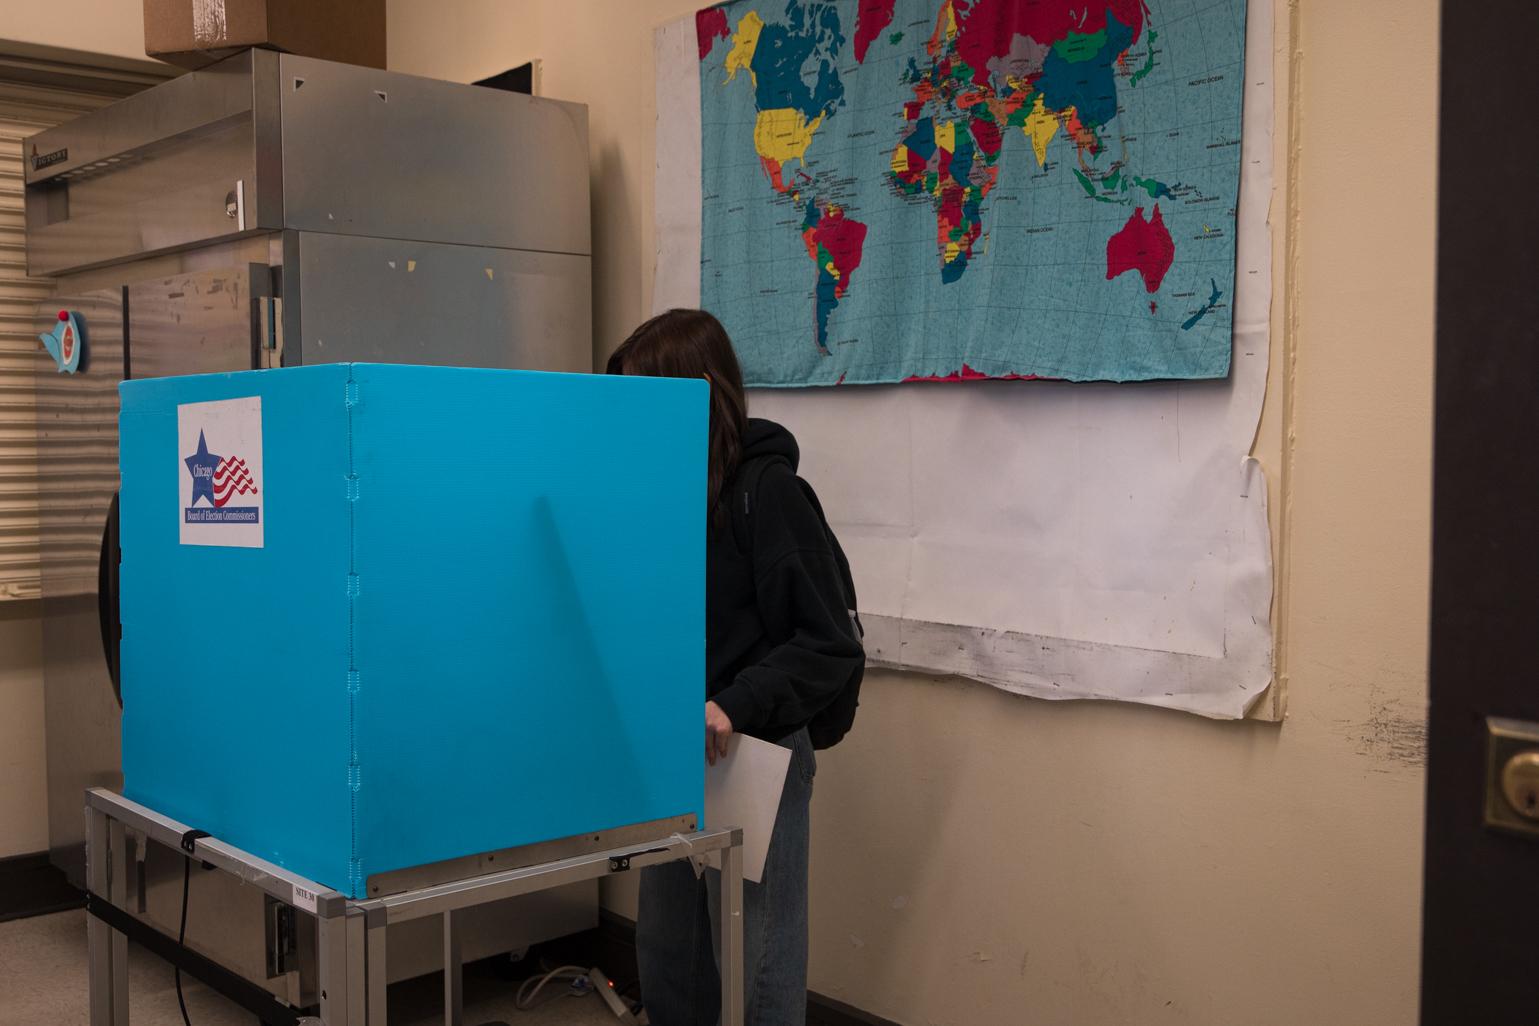 A senior from Kelvyn Park High School fills out their ballot for the Feb. 28 Chicago municipal election behind a voting booth at the Kilbourn Park polling station. (Michael Izquierdo / WTTW News)